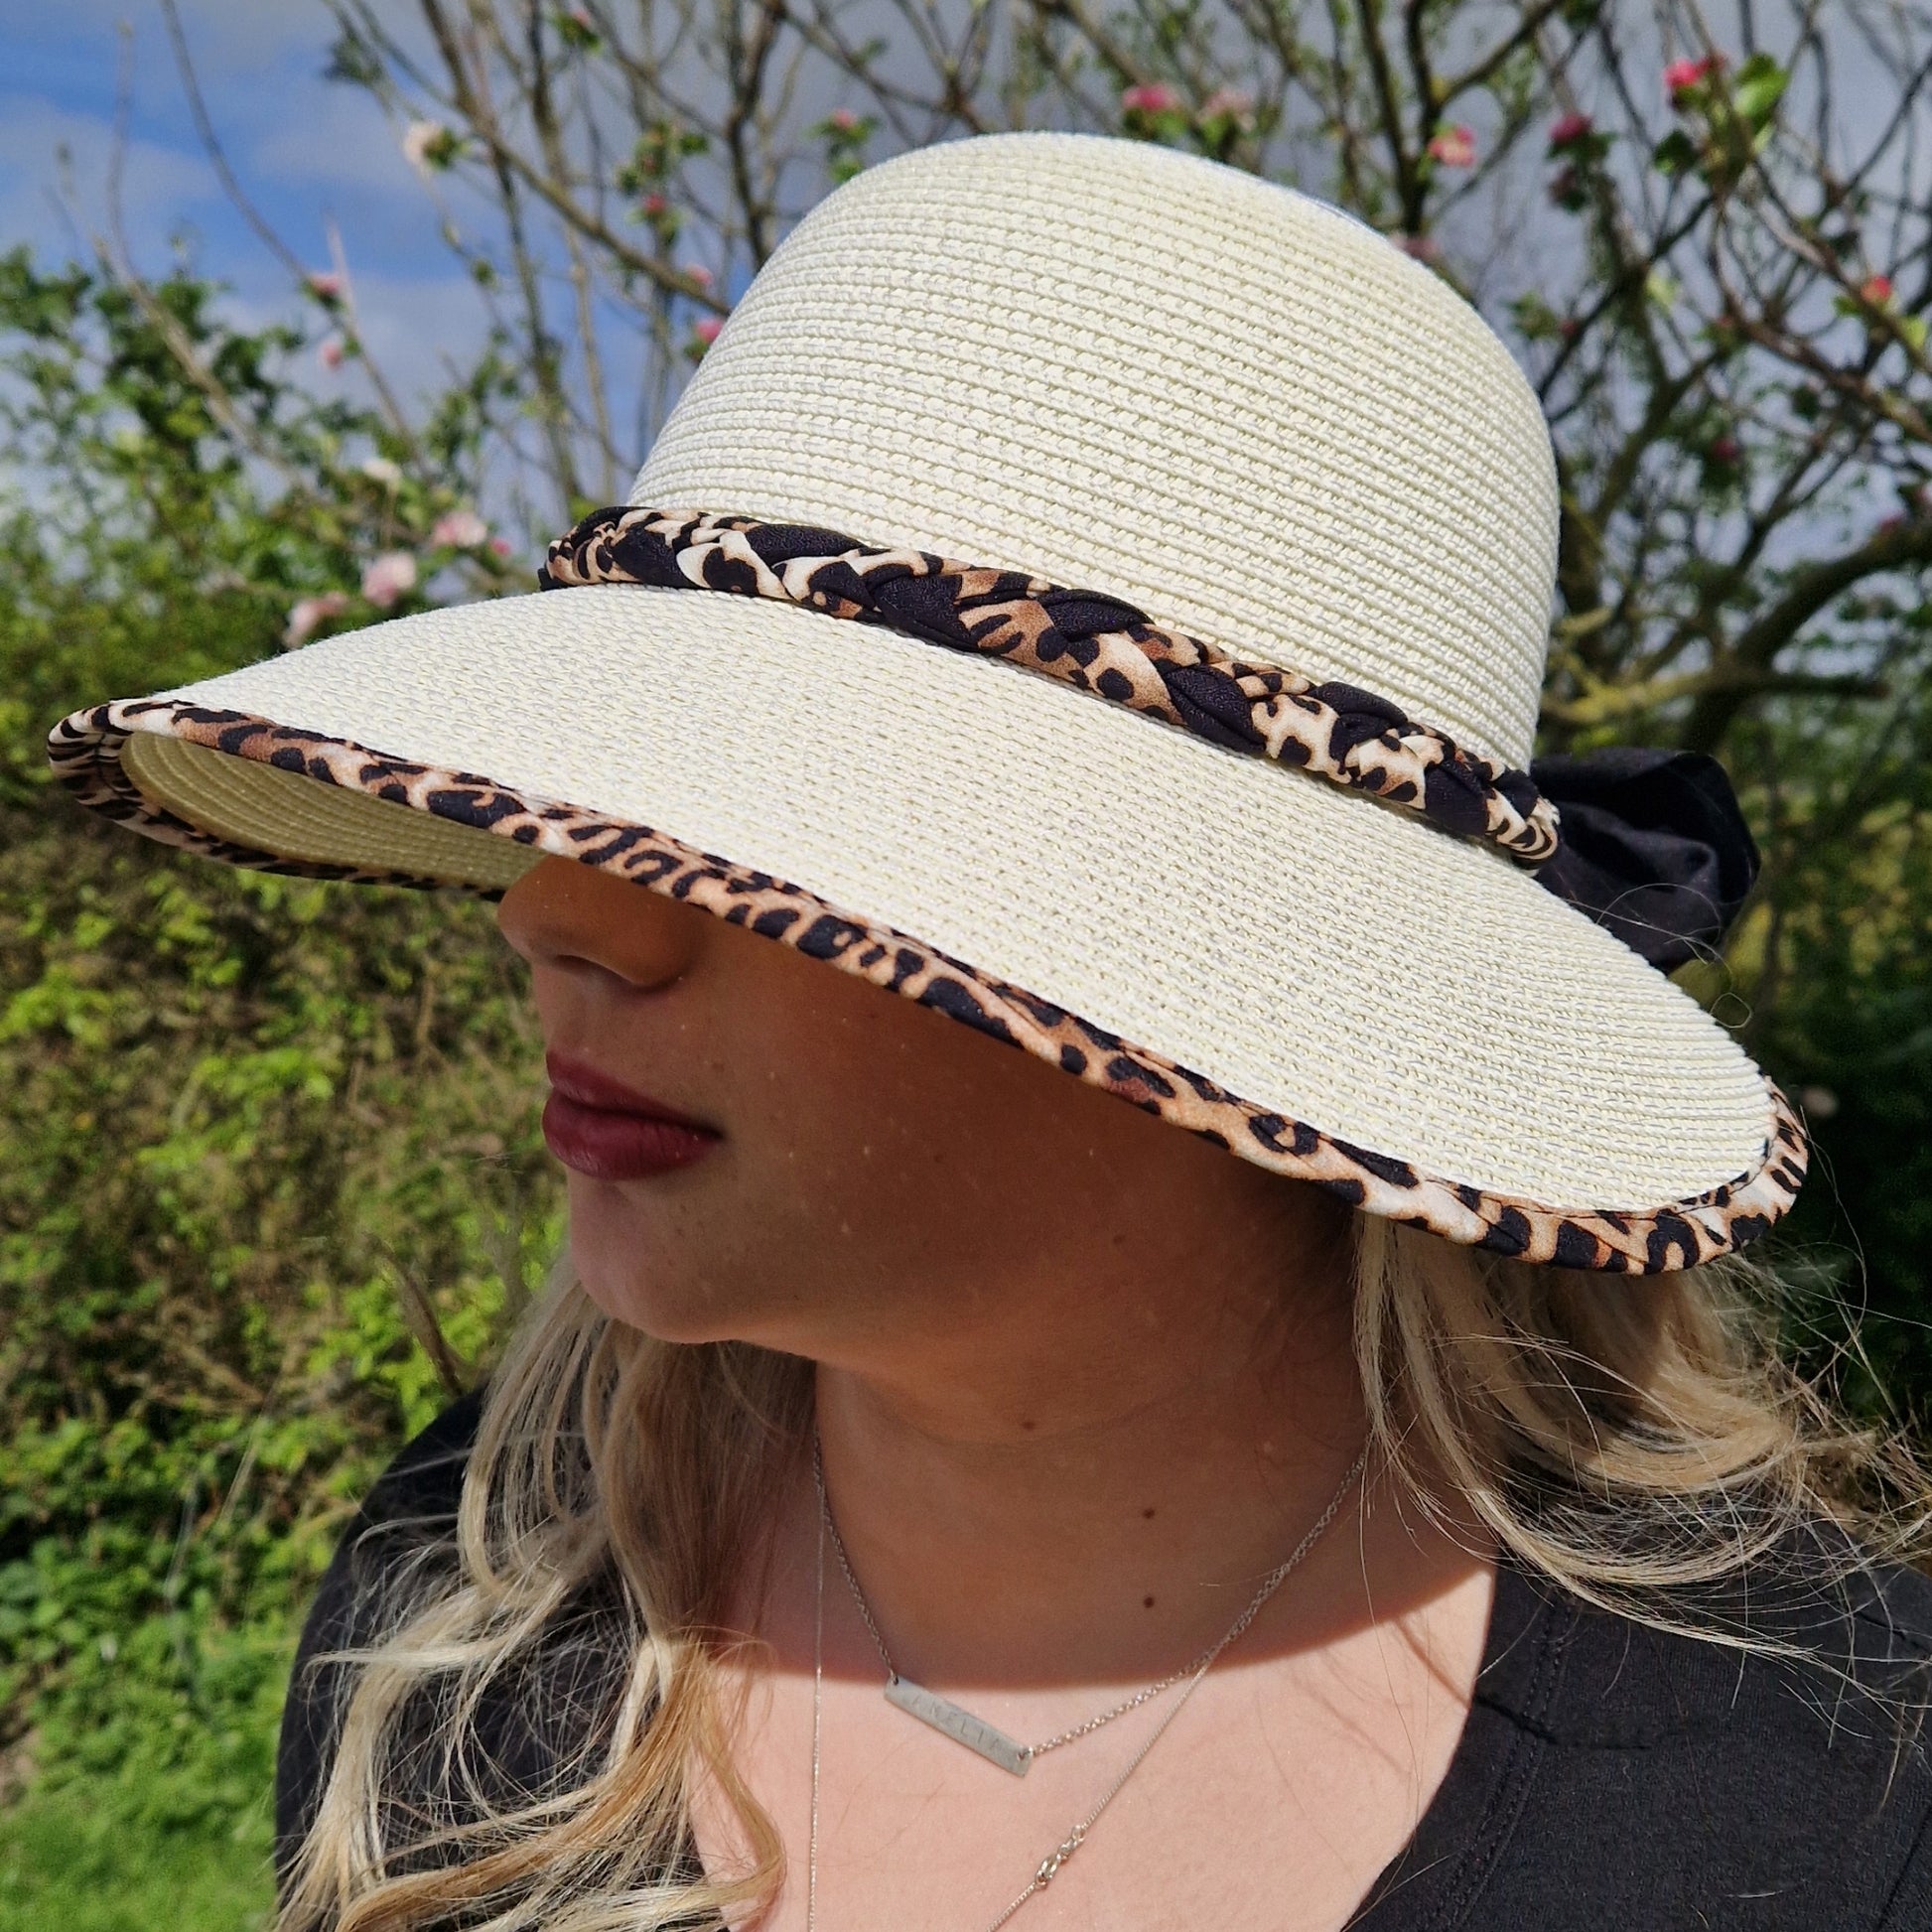 Lady wearing a Cream open backed hat with an animal print trim and black bow.